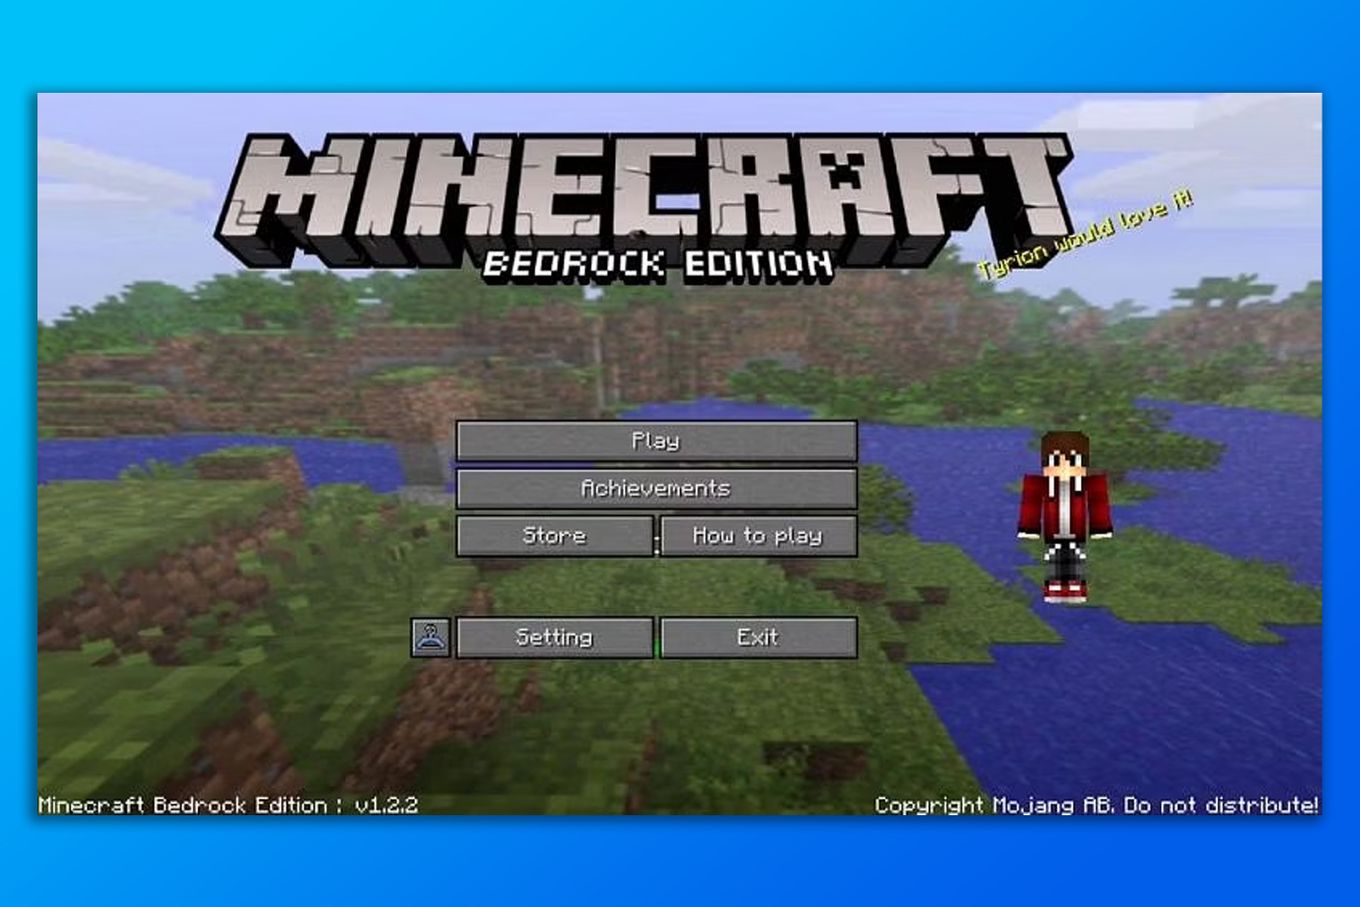 Minecraft Free Trial for Different Devices